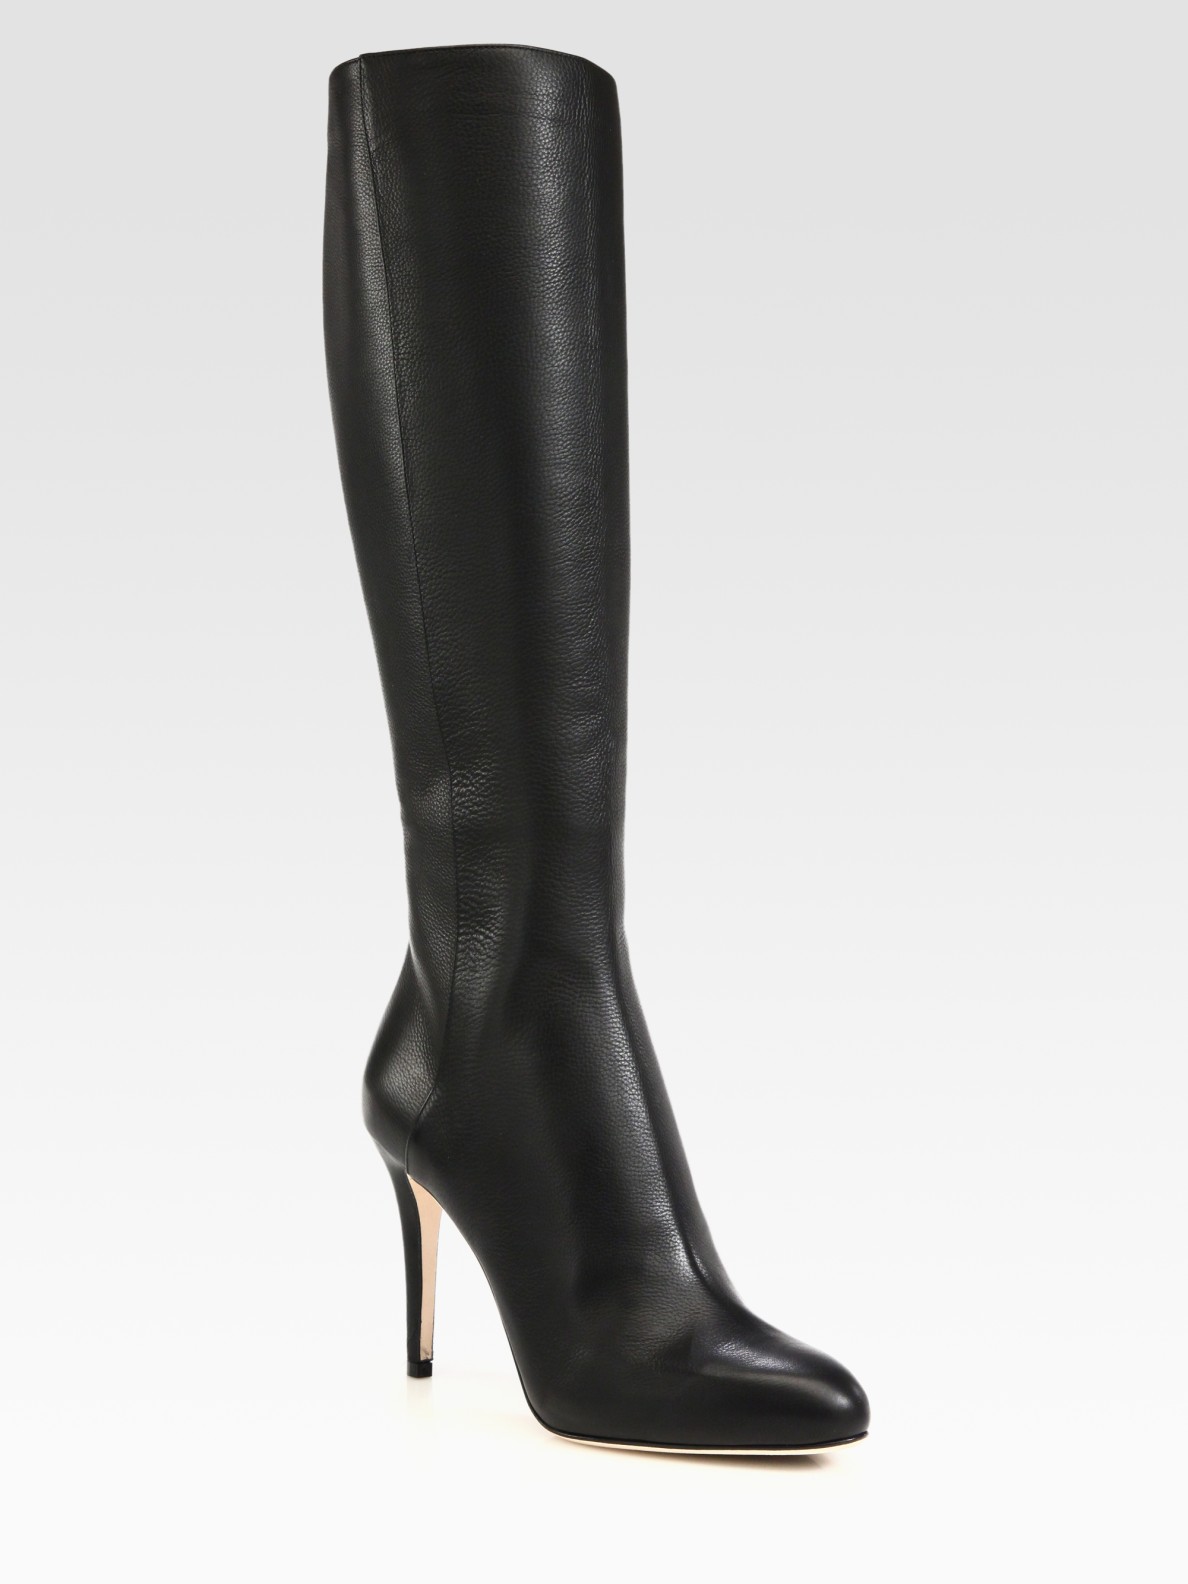 Jimmy choo Glory Leather Knee High Boots in Black | Lyst